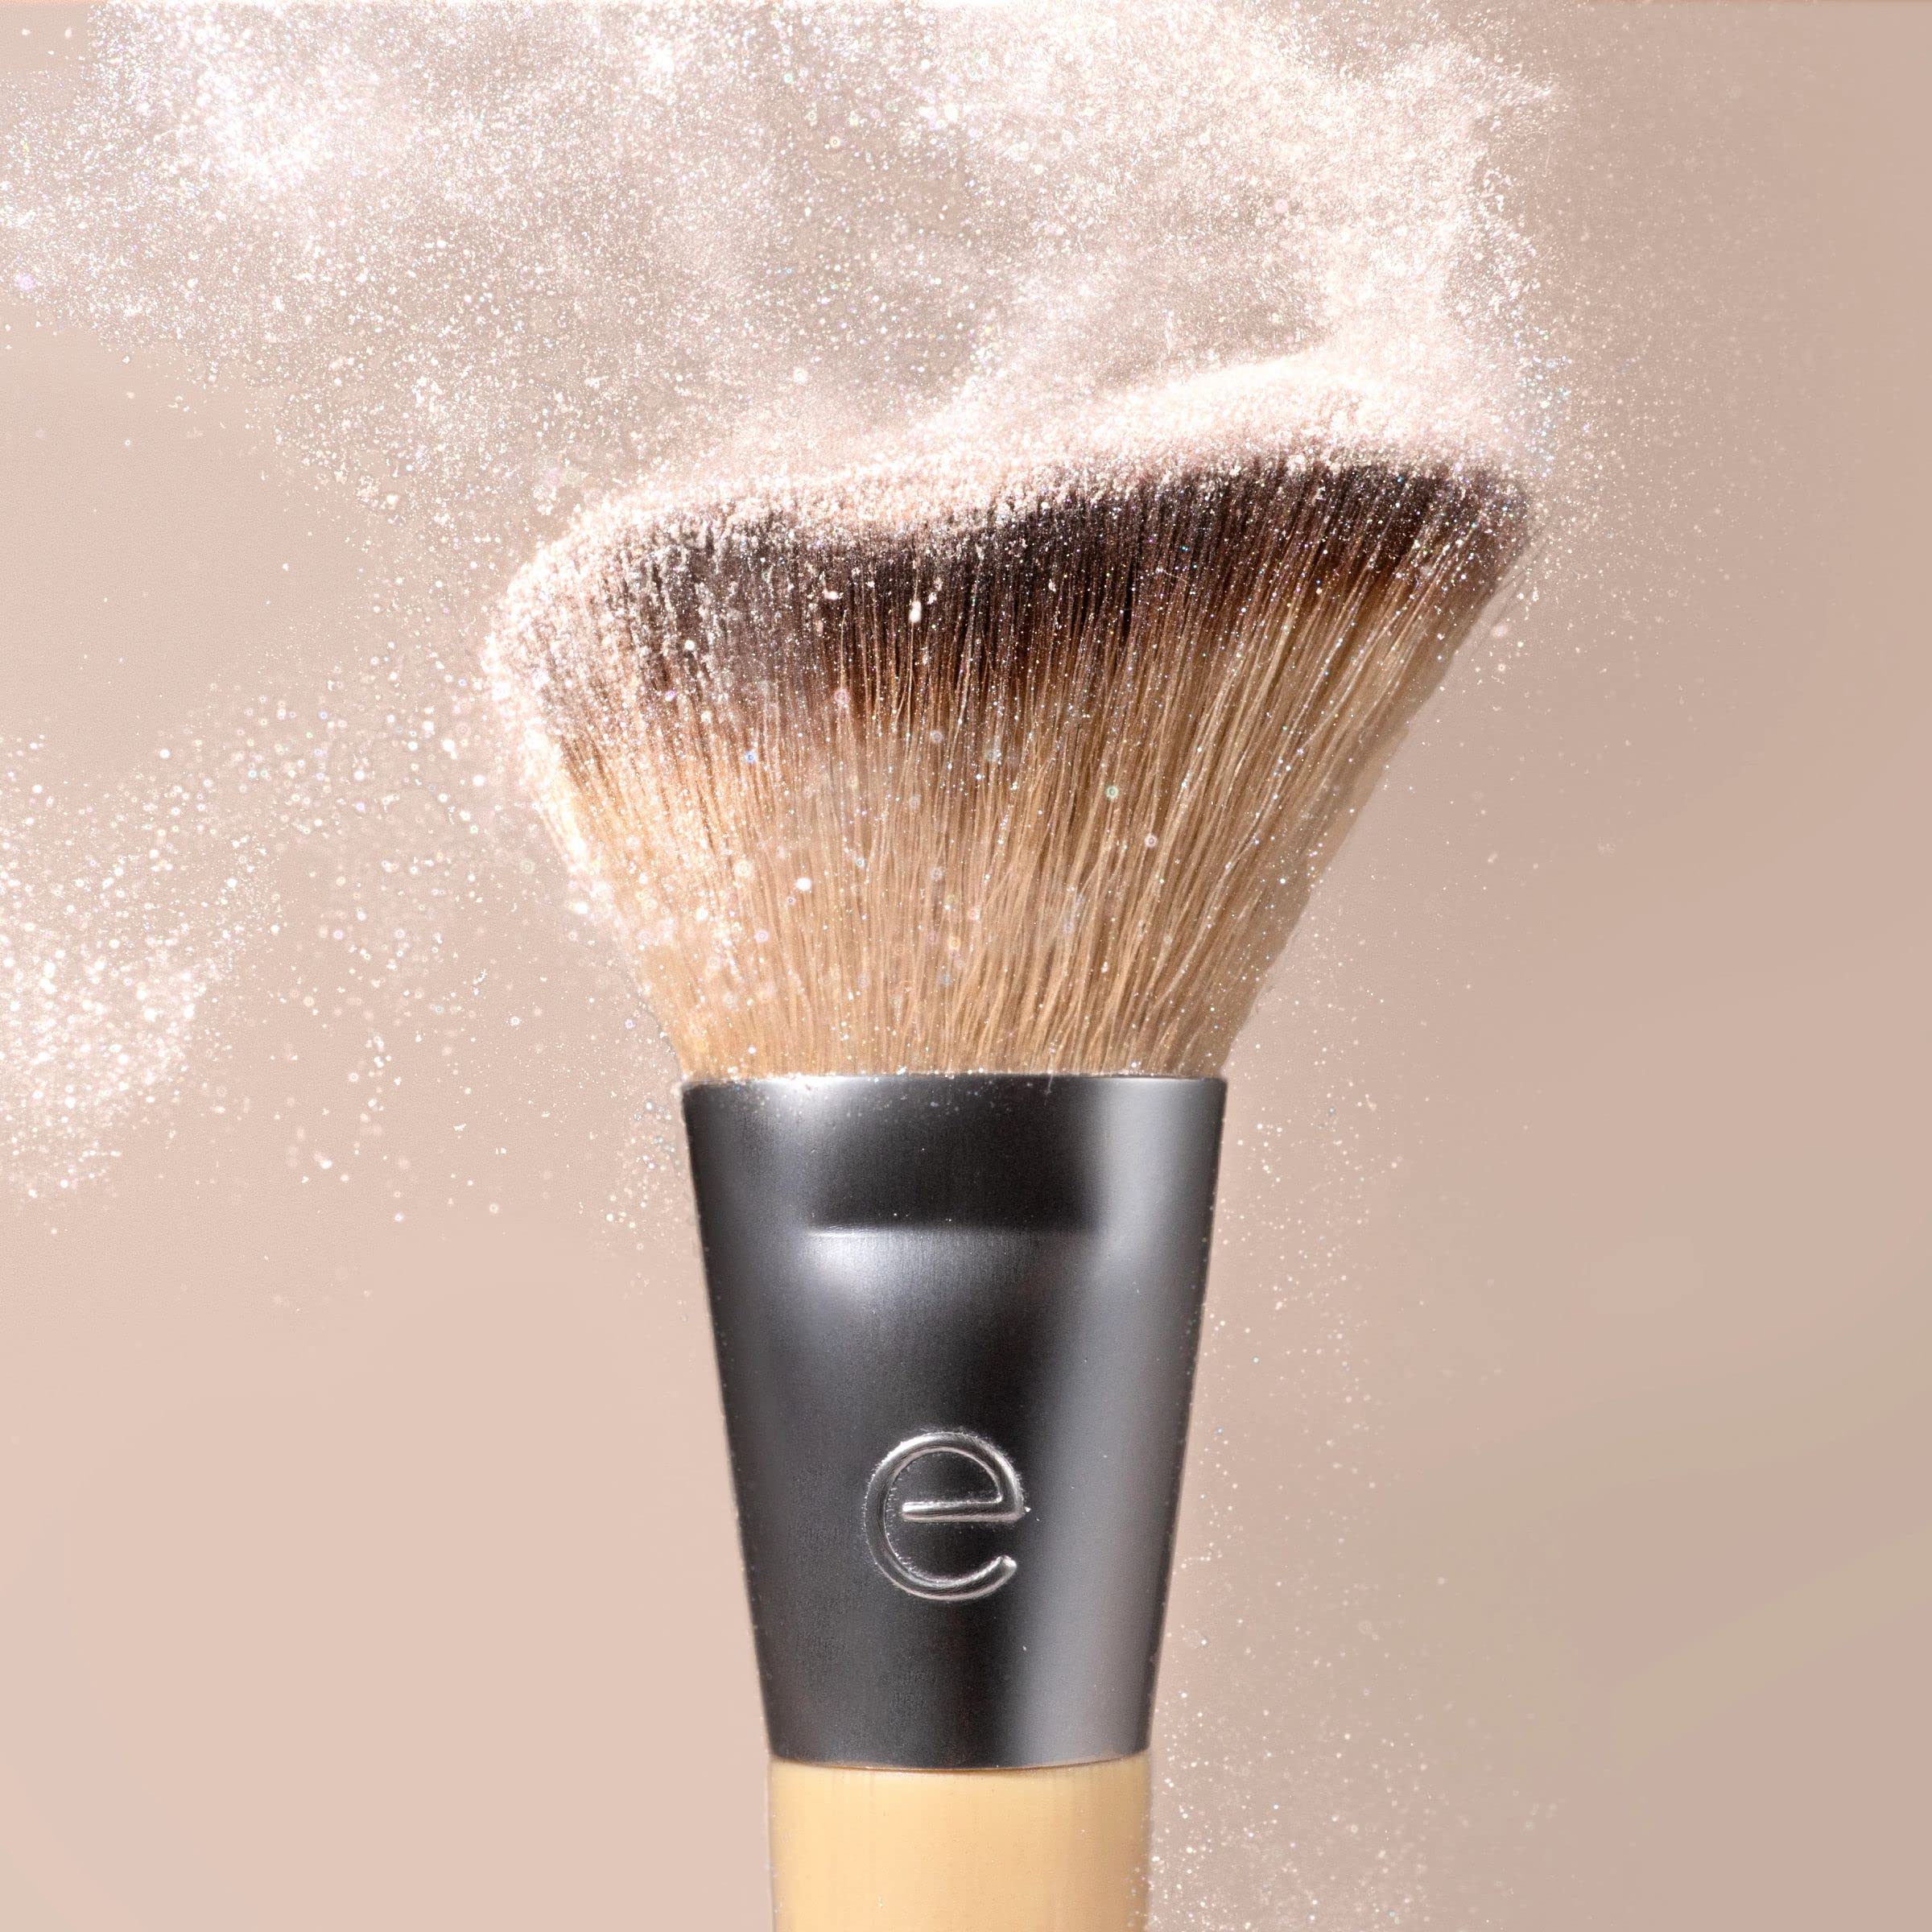 EcoTools New Natural Blush & Highlight Duo, Face Makeup Brushes For Powder Makeup, Dense, Synthetic Bristles For Enhancing Skin, Vegan & Cruelty-Free, 2 Count